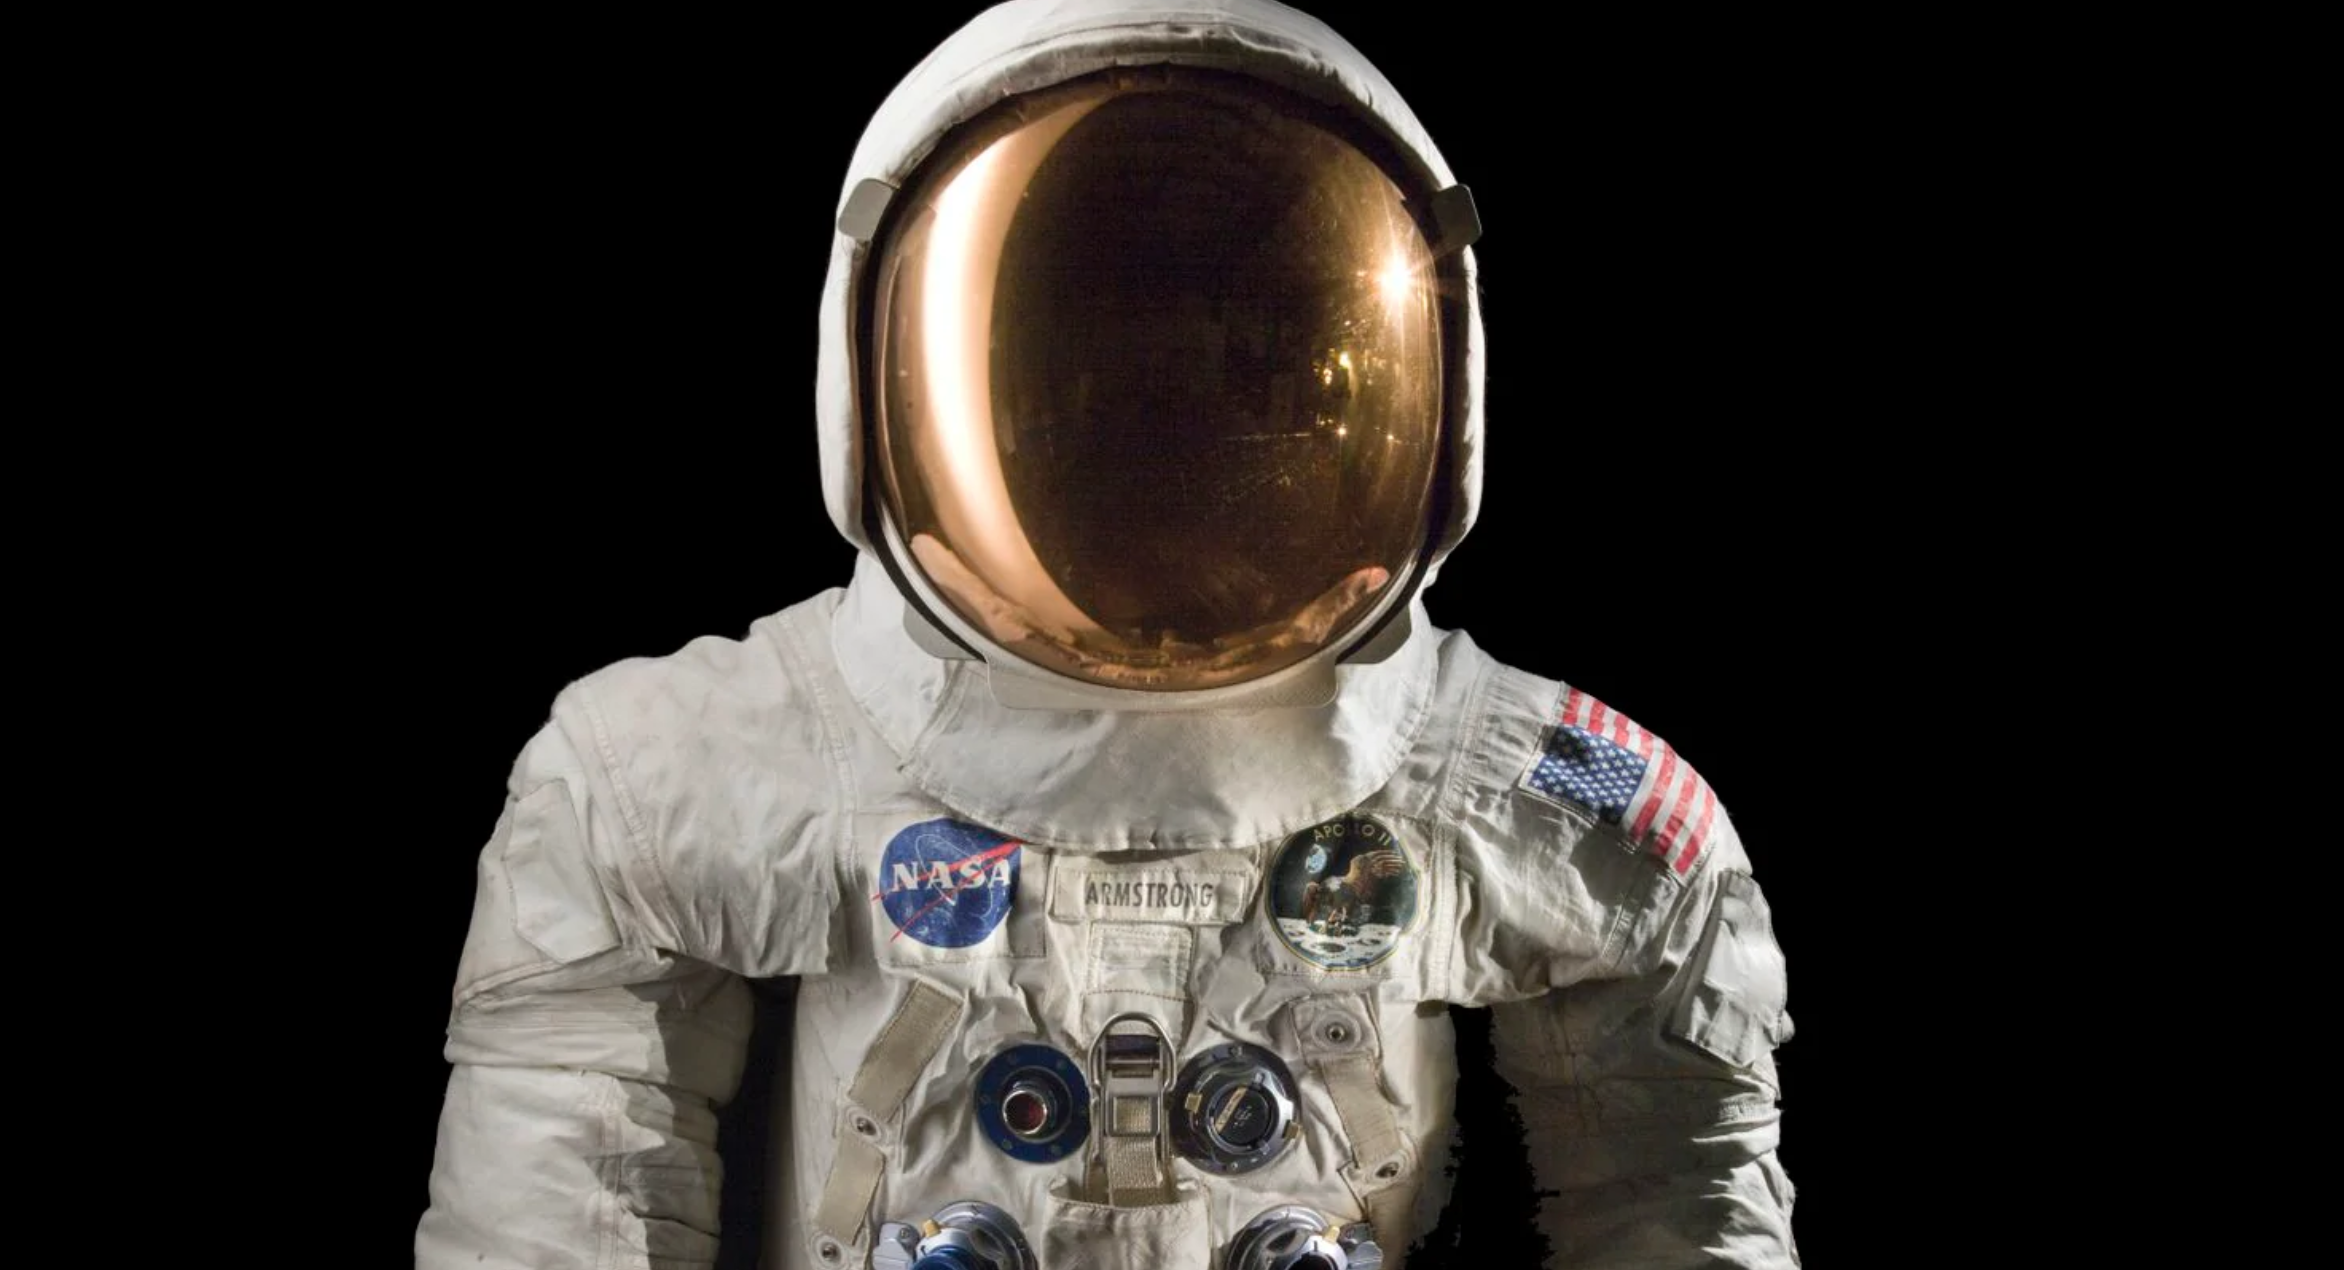 The false, but persistent, rumor that Neil Armstrong converted to Islam